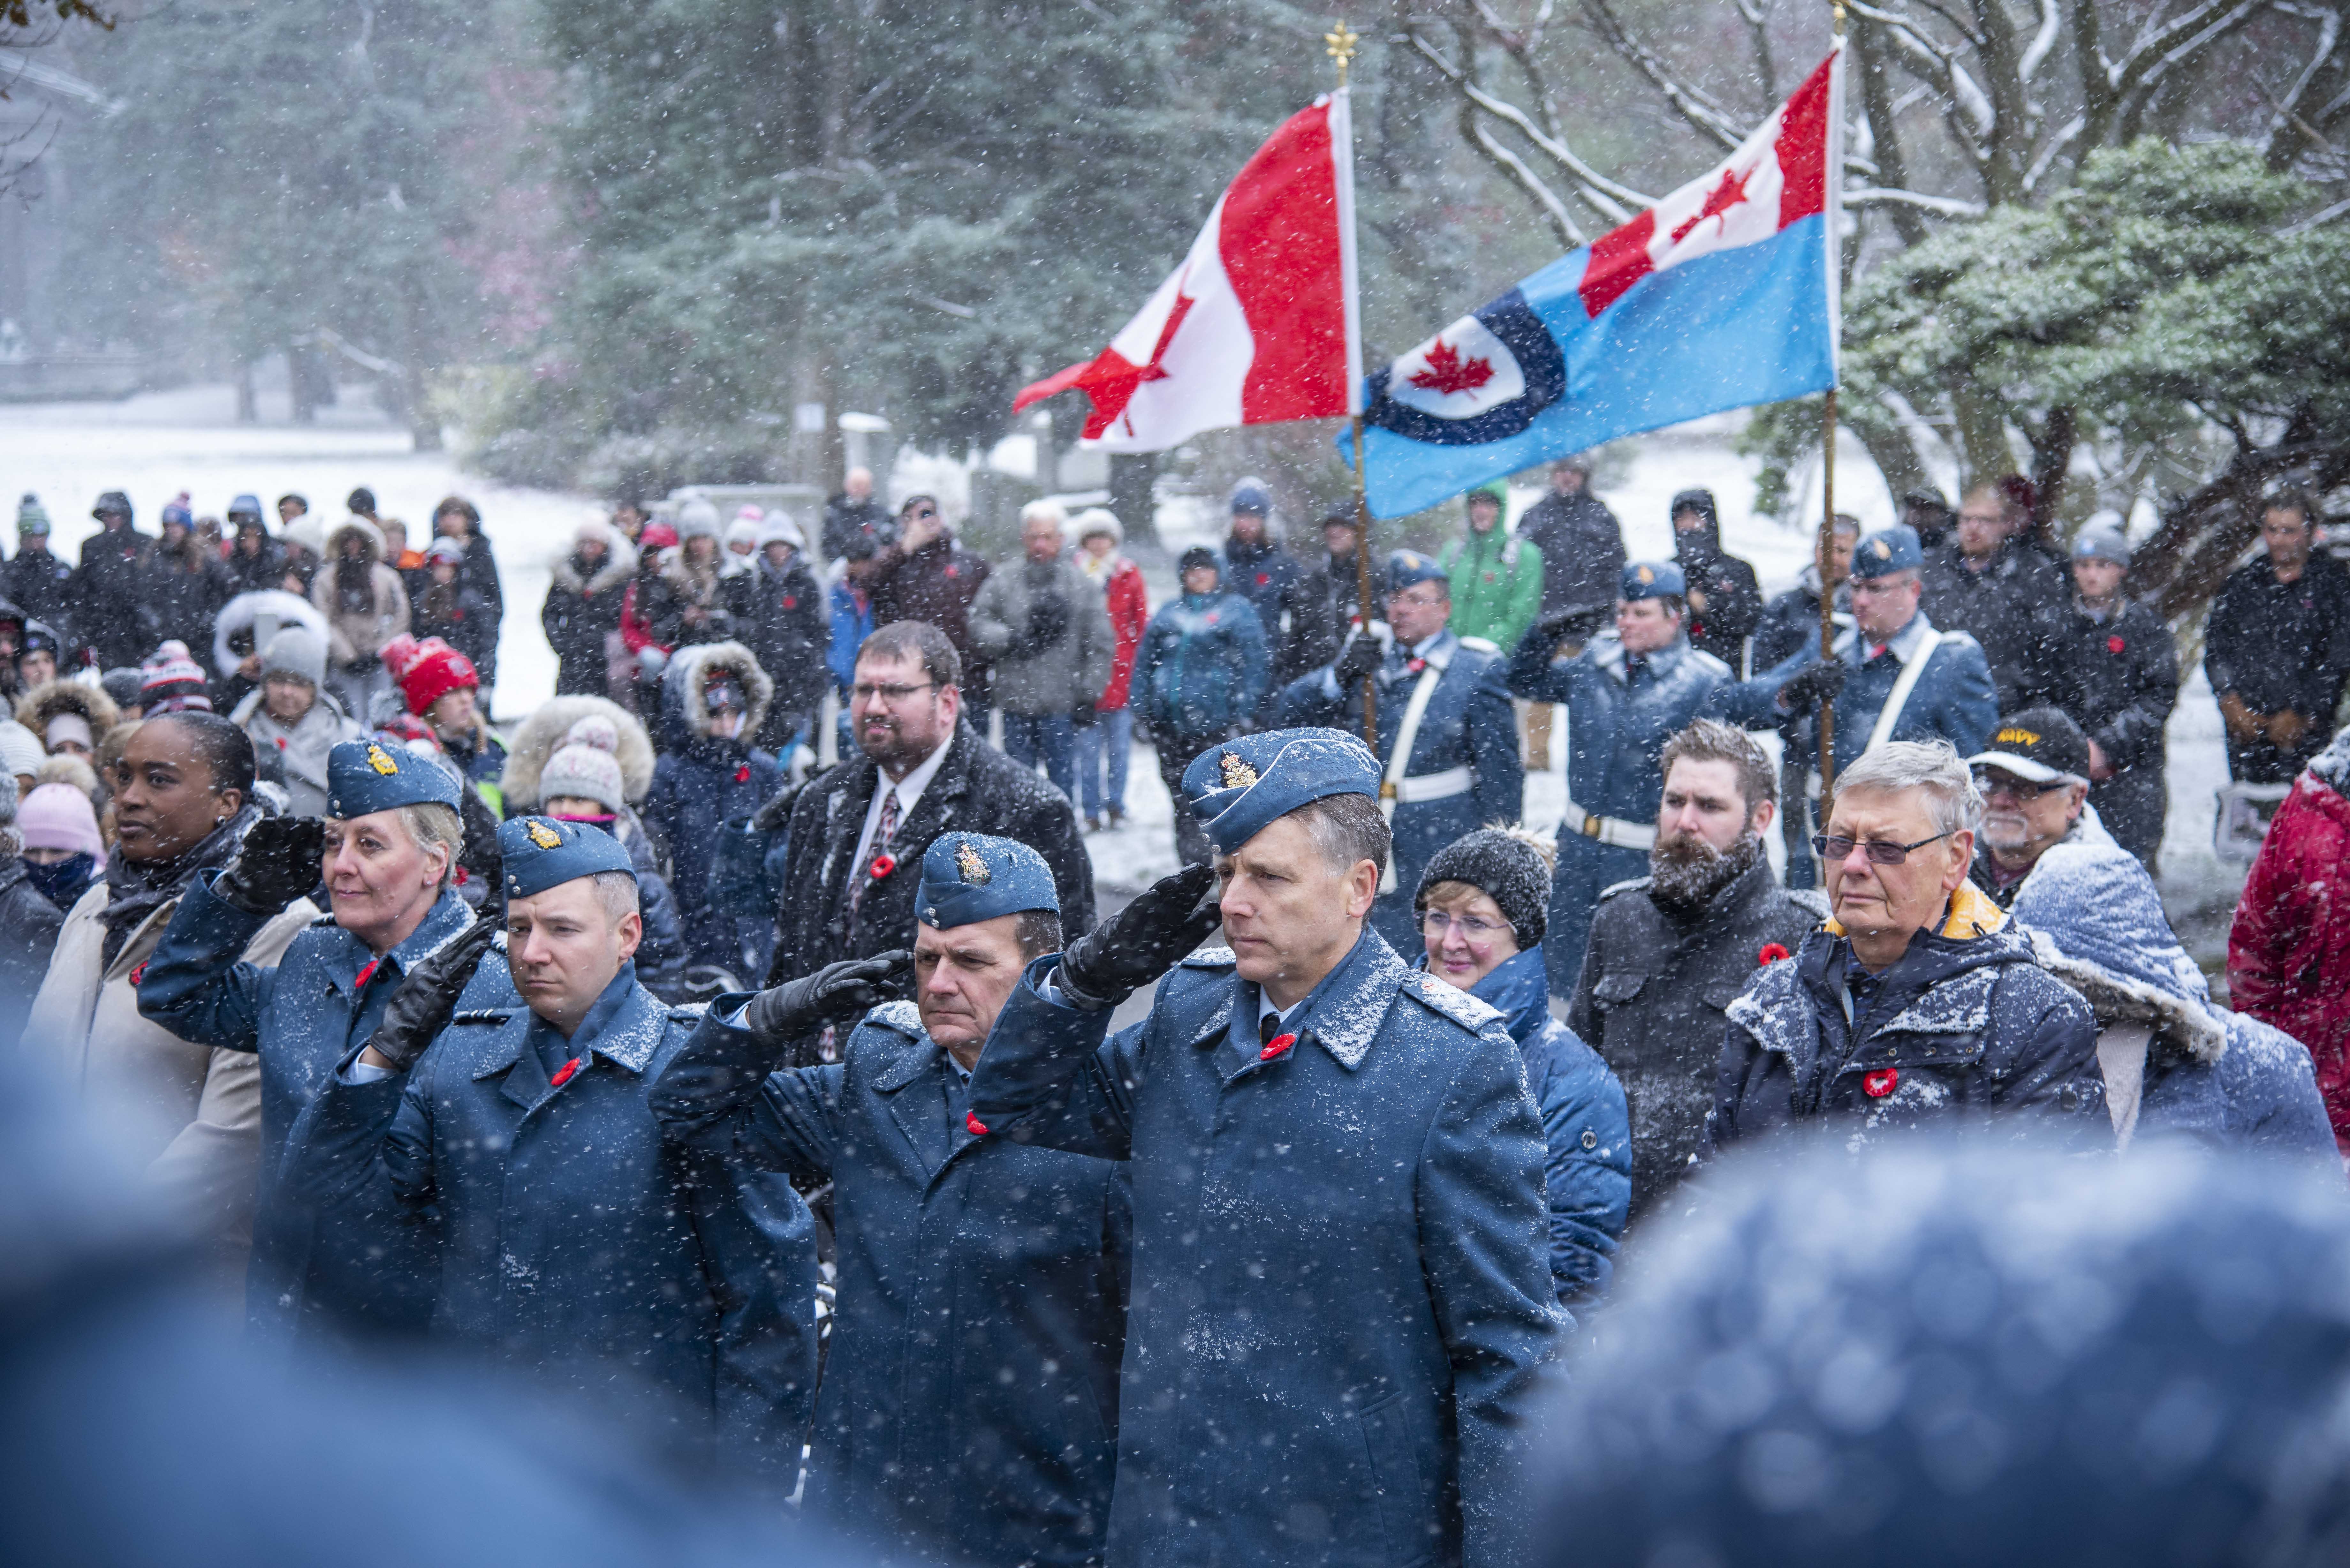 Four people dressed in Air Force uniforms salute, as snow falls. They are surrounded by a crowd of people. 